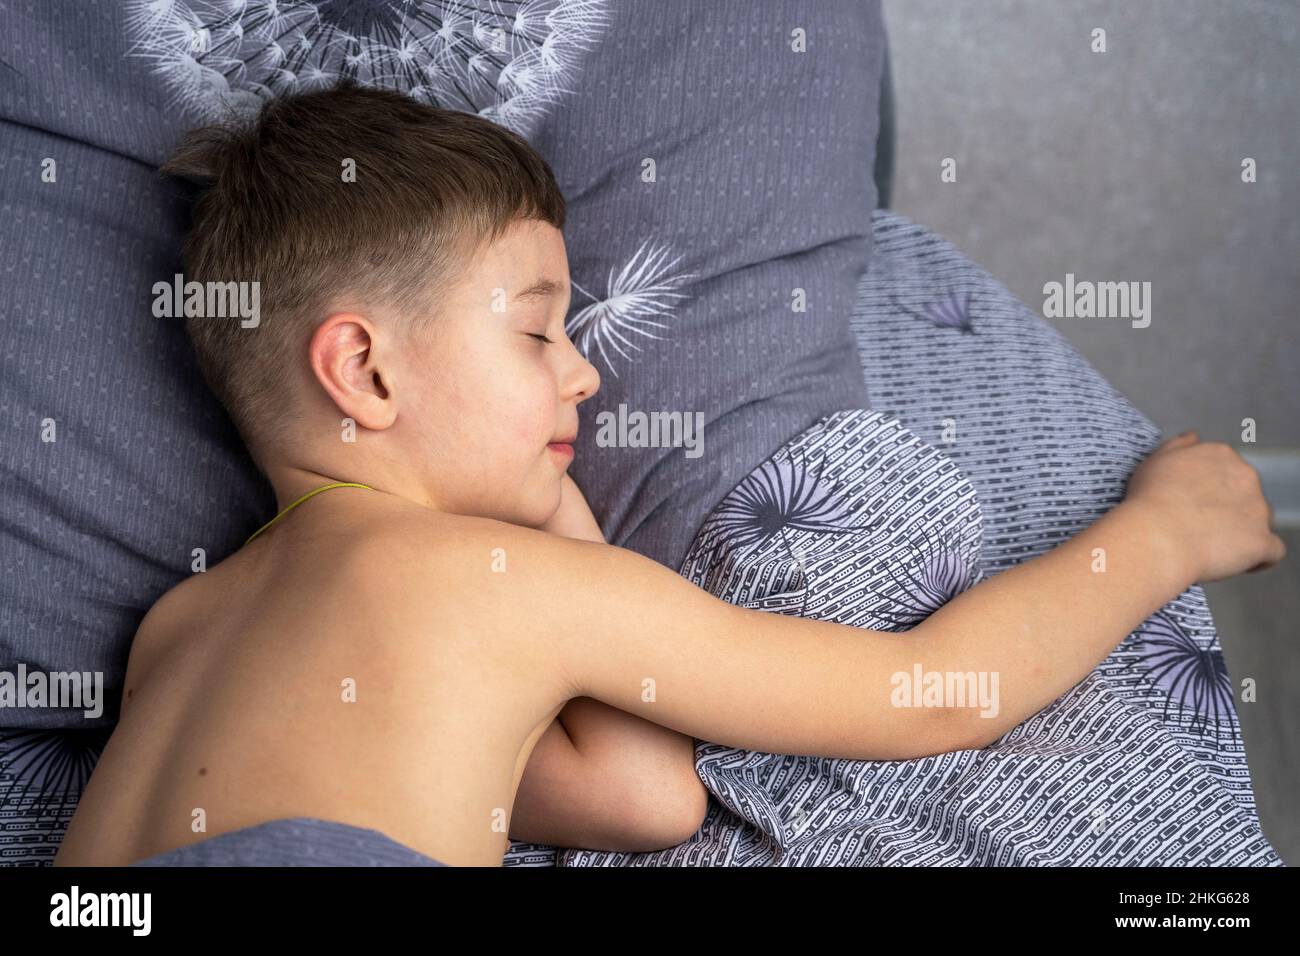 A cute Caucasian boy of 5 years old is sleeping in bed. rest, home comfort and tranquility. Stock Photo